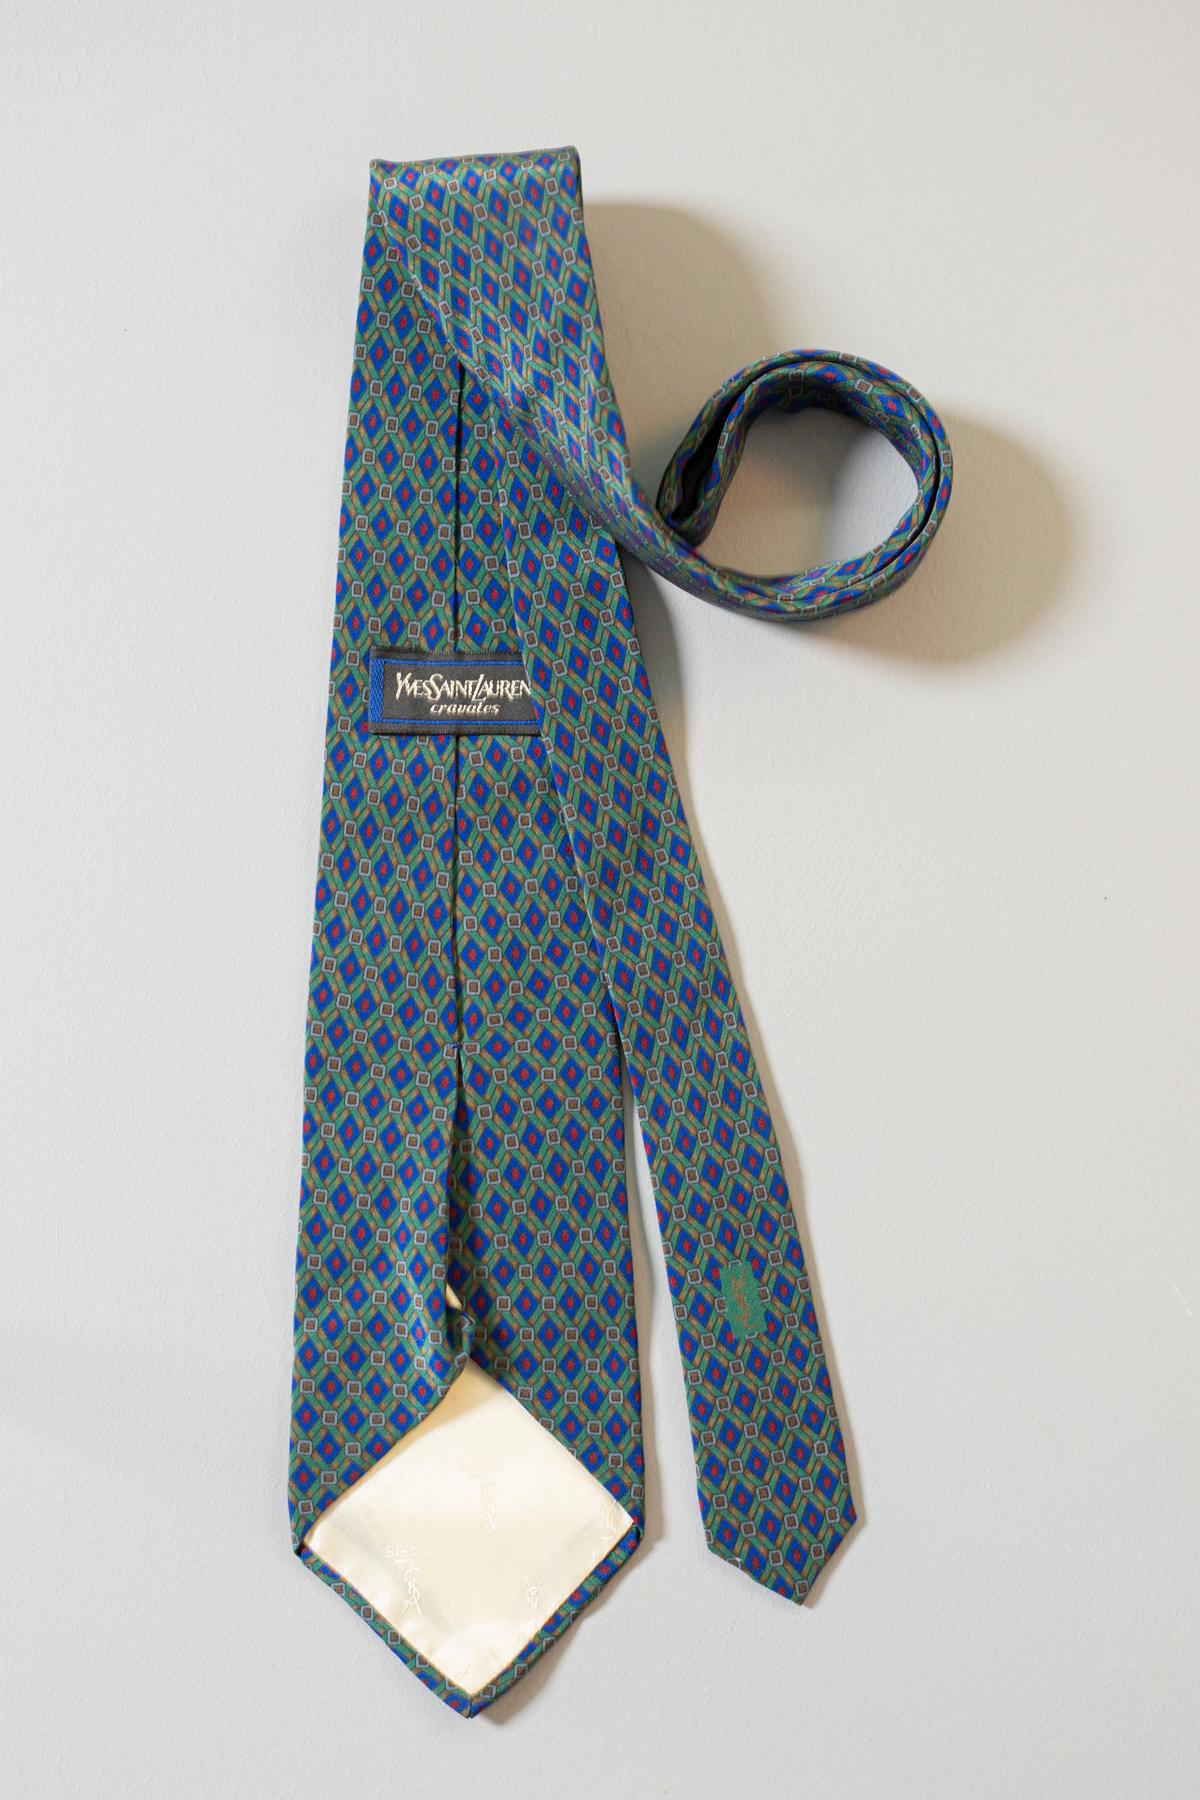 Fine and elegant, this vintage tie has been designed by Yves Saint Laurent and it is in all silk. Its green, blue and red motifs make this tie classy and stylish. This tie is perfect for every situation, from work to a night out.  